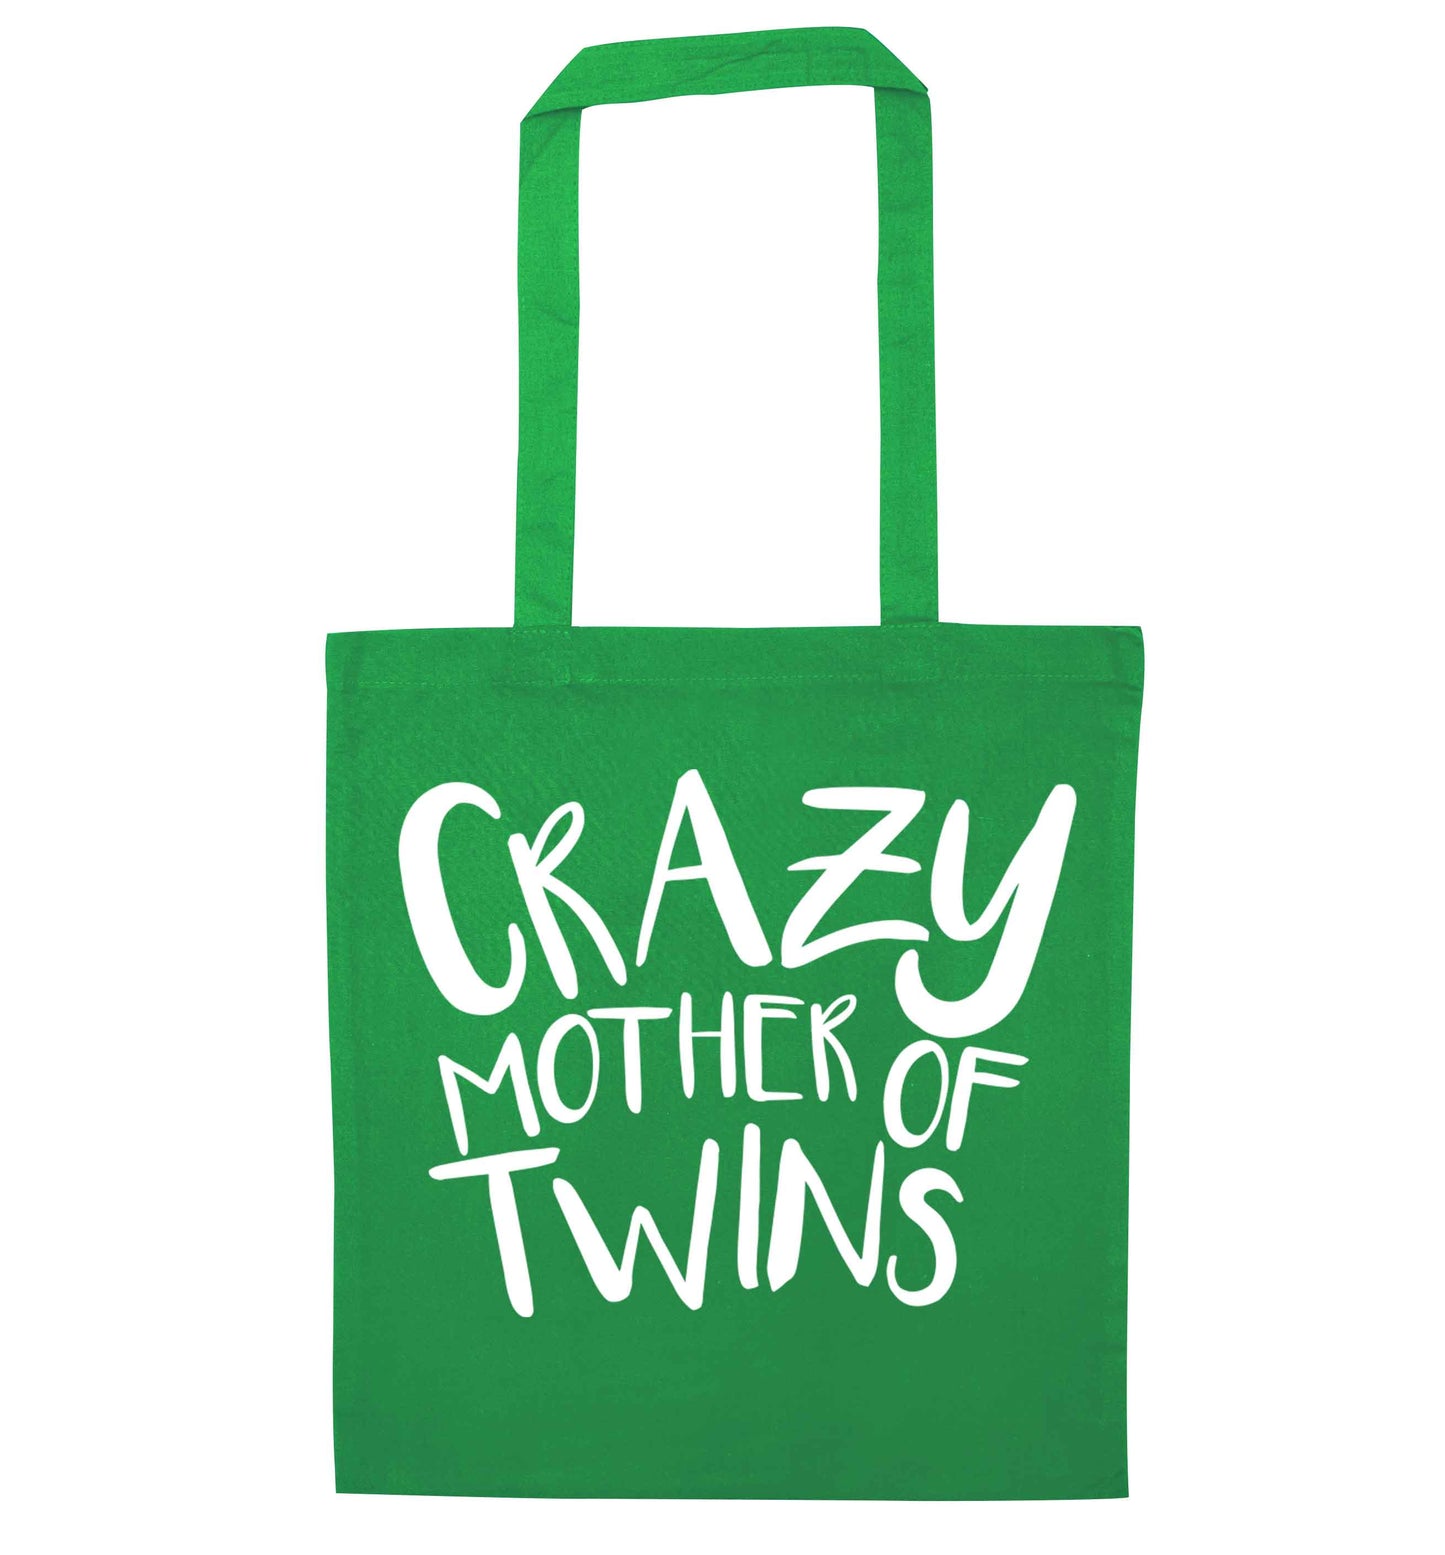 Crazy mother of twins green tote bag